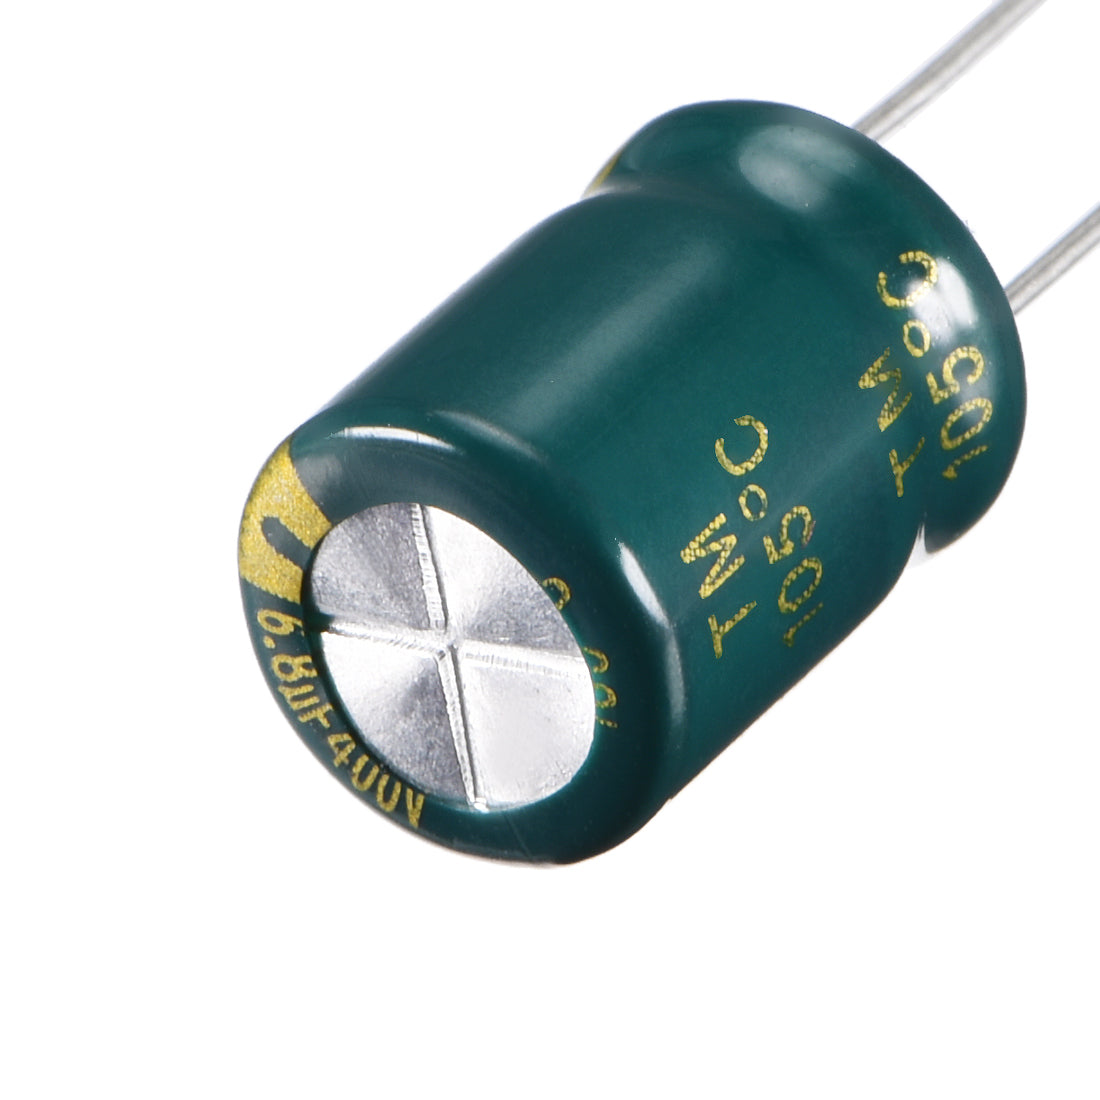 uxcell Uxcell Aluminum Radial Electrolytic Capacitor Low ESR Green with 6.8uF 400V 105 Celsius Life 3000H 10 x 13mm High Ripple Current,Low Impedance 10pcs